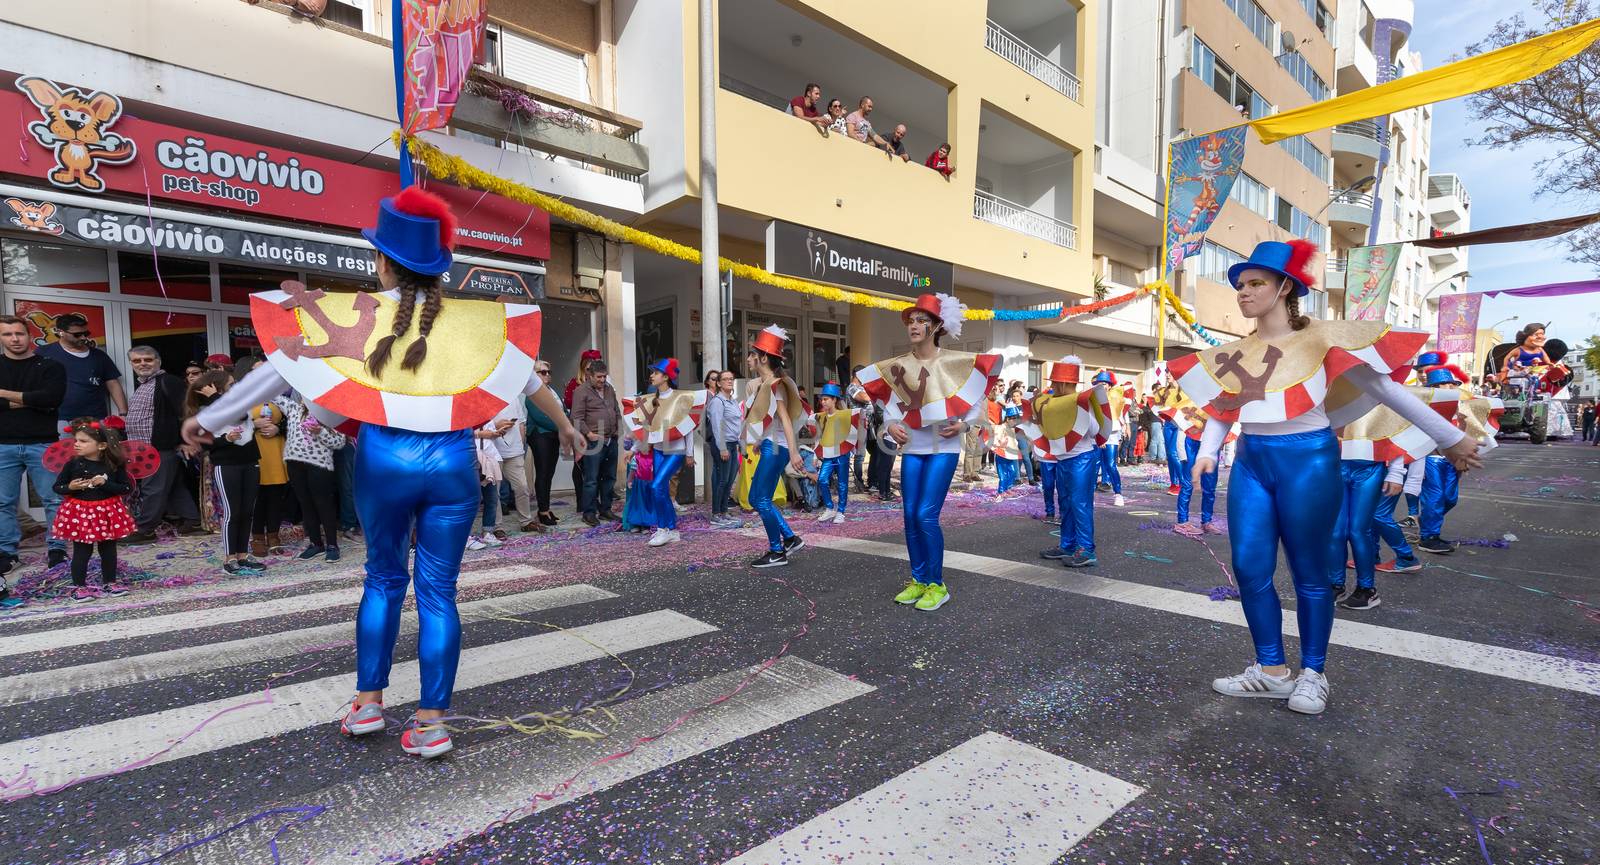 Loule, Portugal - February 25, 2020: dancers parading in the street in front of the public in the parade of the traditional carnival of Loule city on a February day